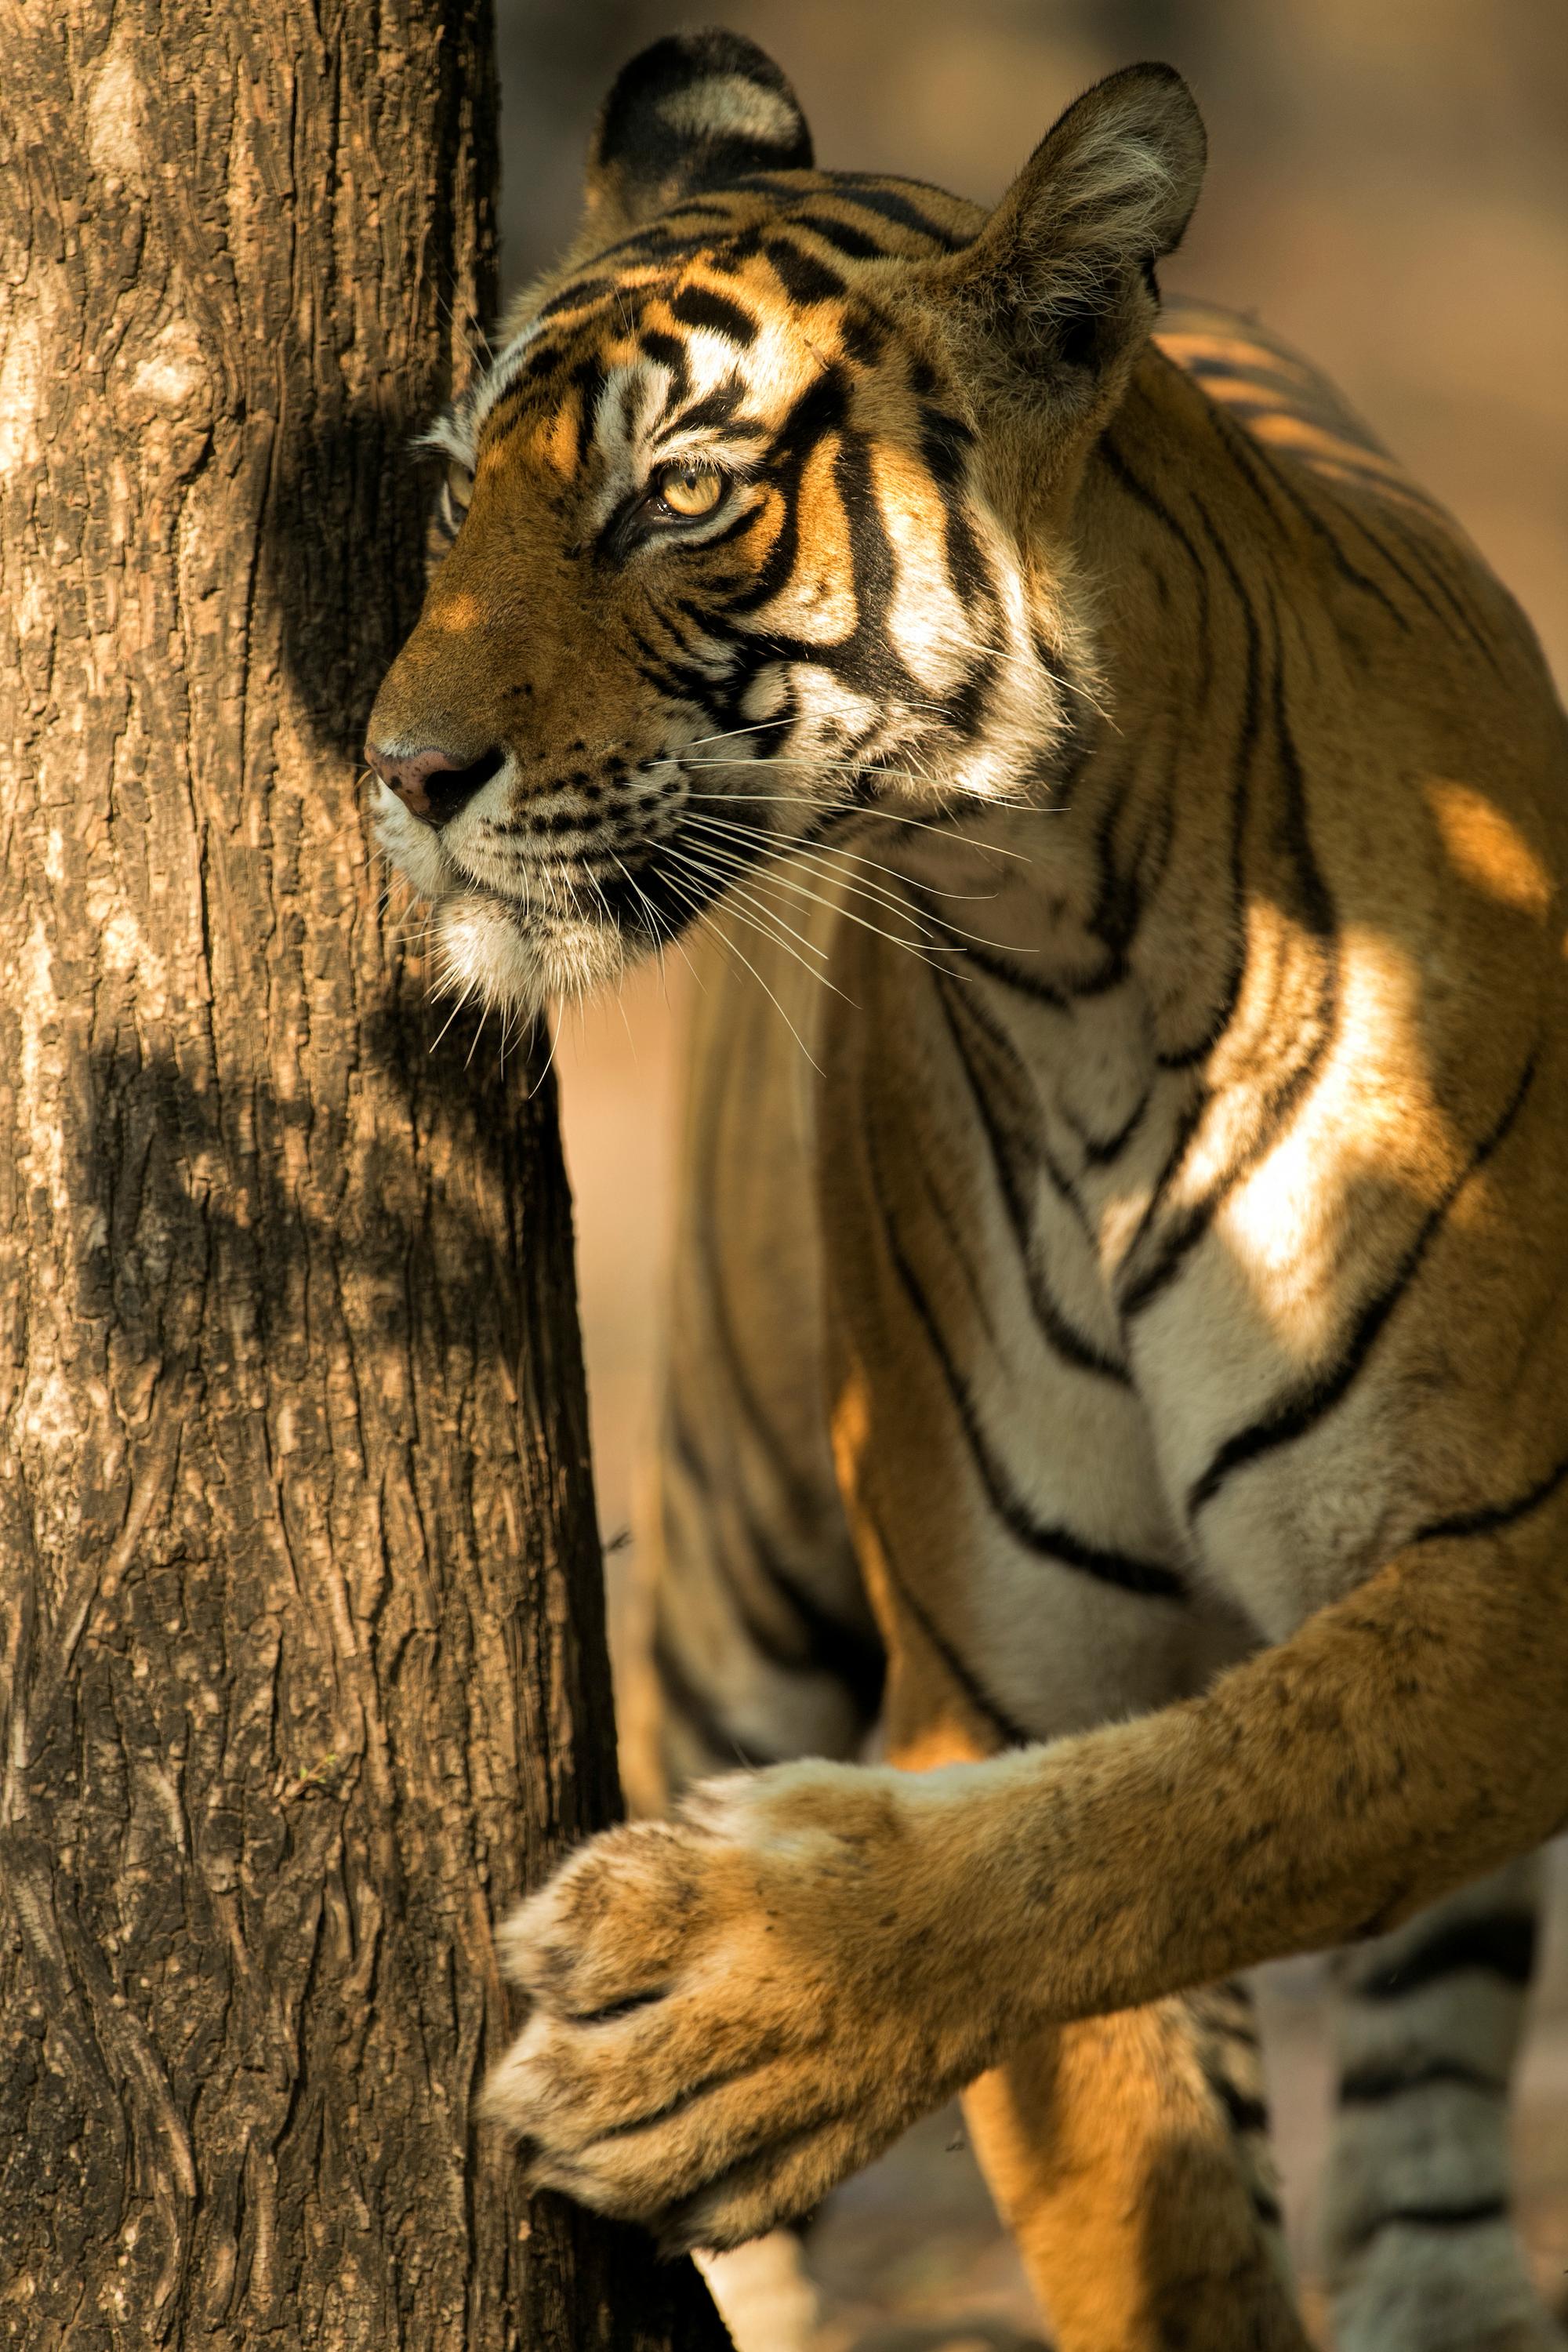 Aditya Dicky Singh Color Photograph - Landscape Animal Large Photograph Tiger Tree India Wildlife Forest Nature